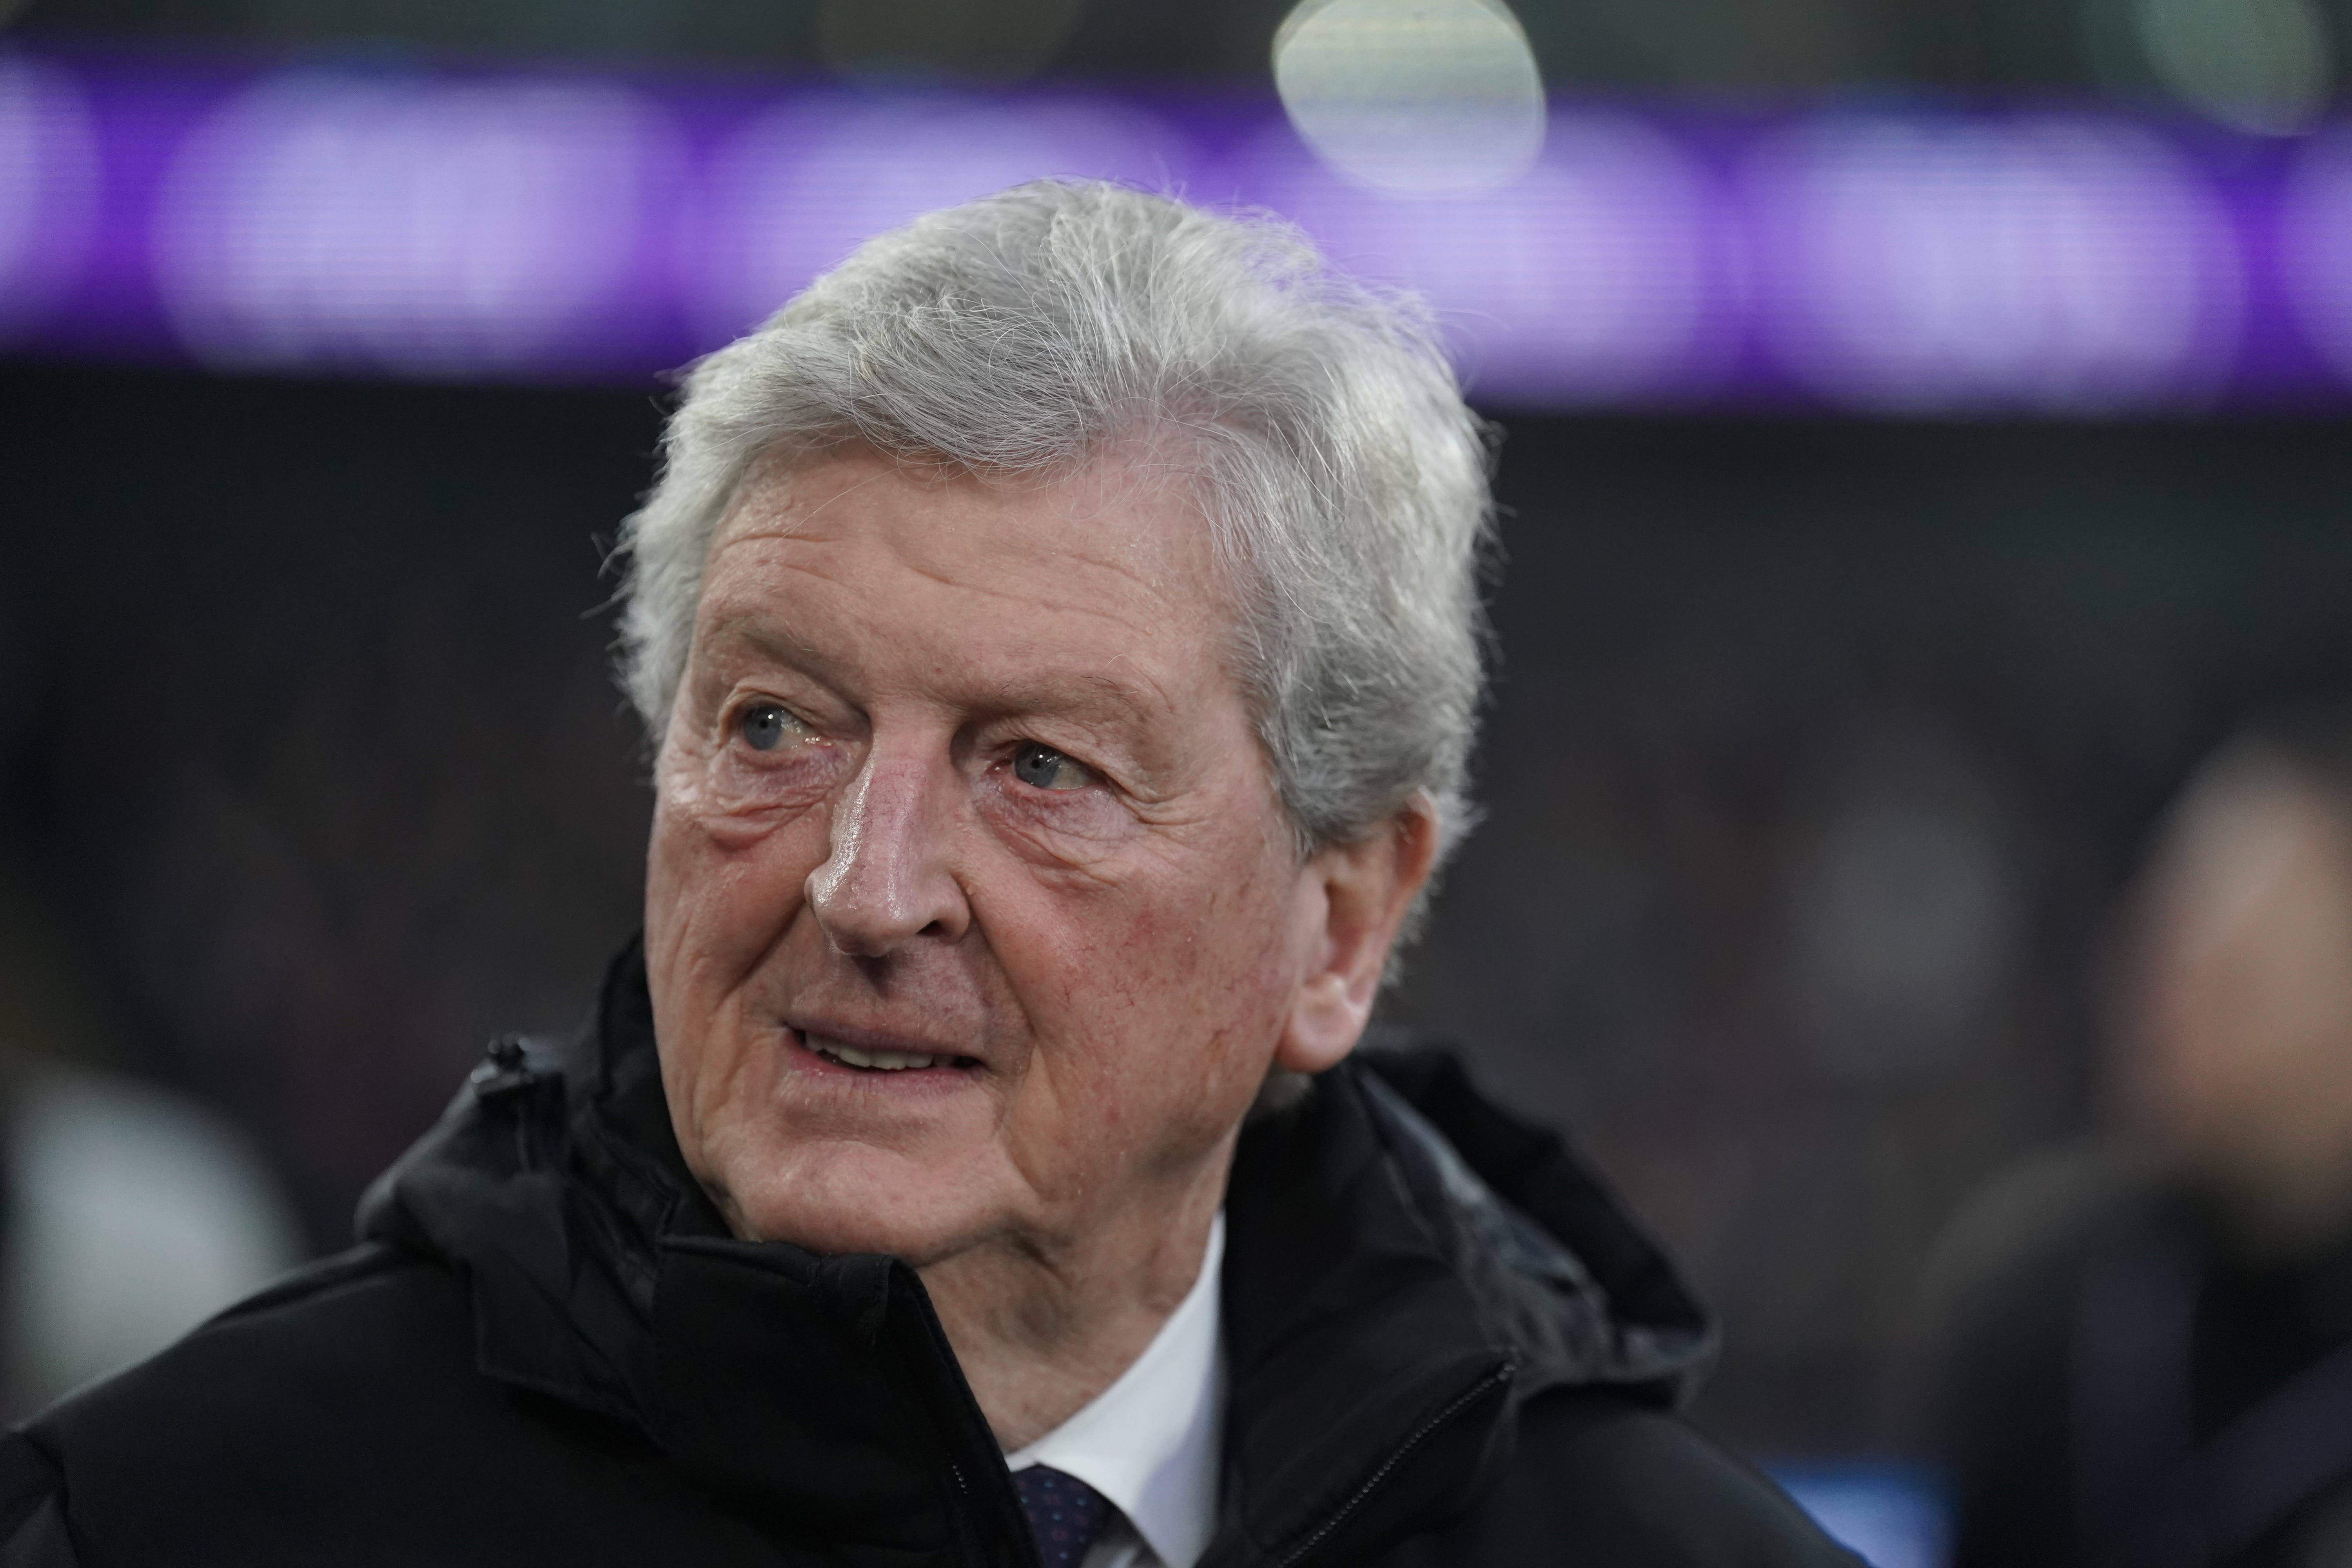 Hodgson kept Palace up last season but the Eagles wasted a year after sticking by him